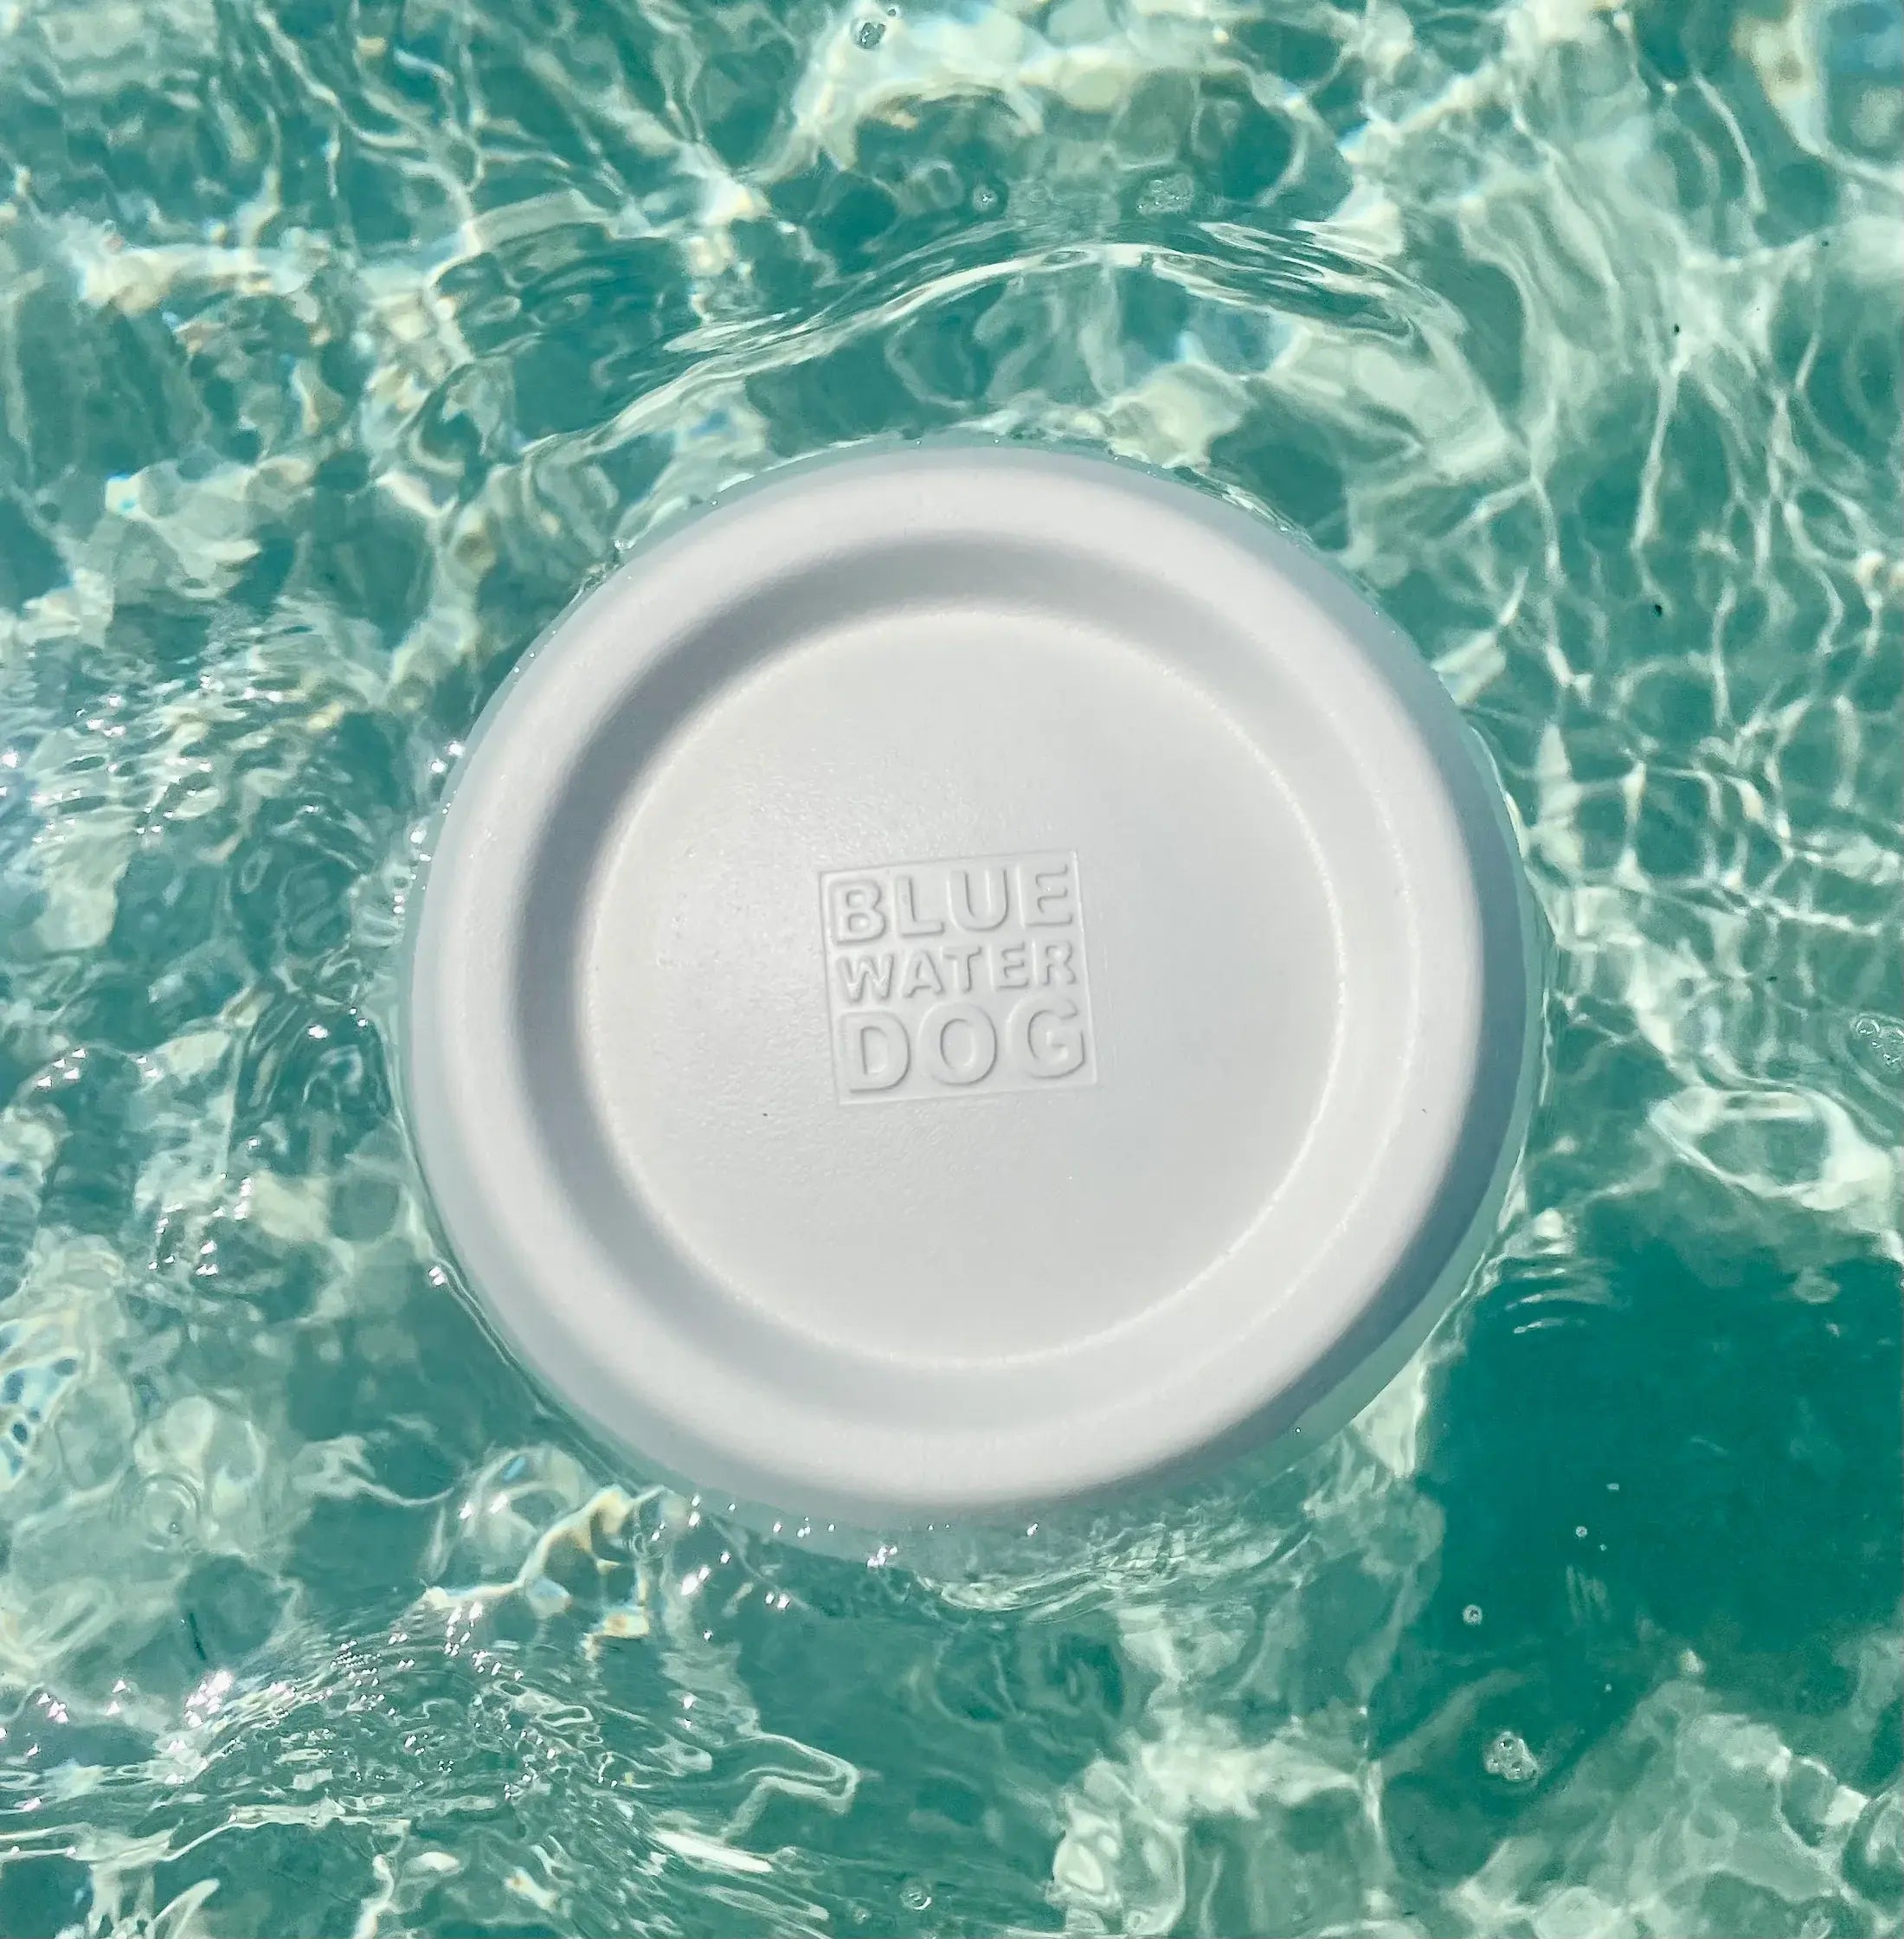 White dog frisbee floating in light blue water.